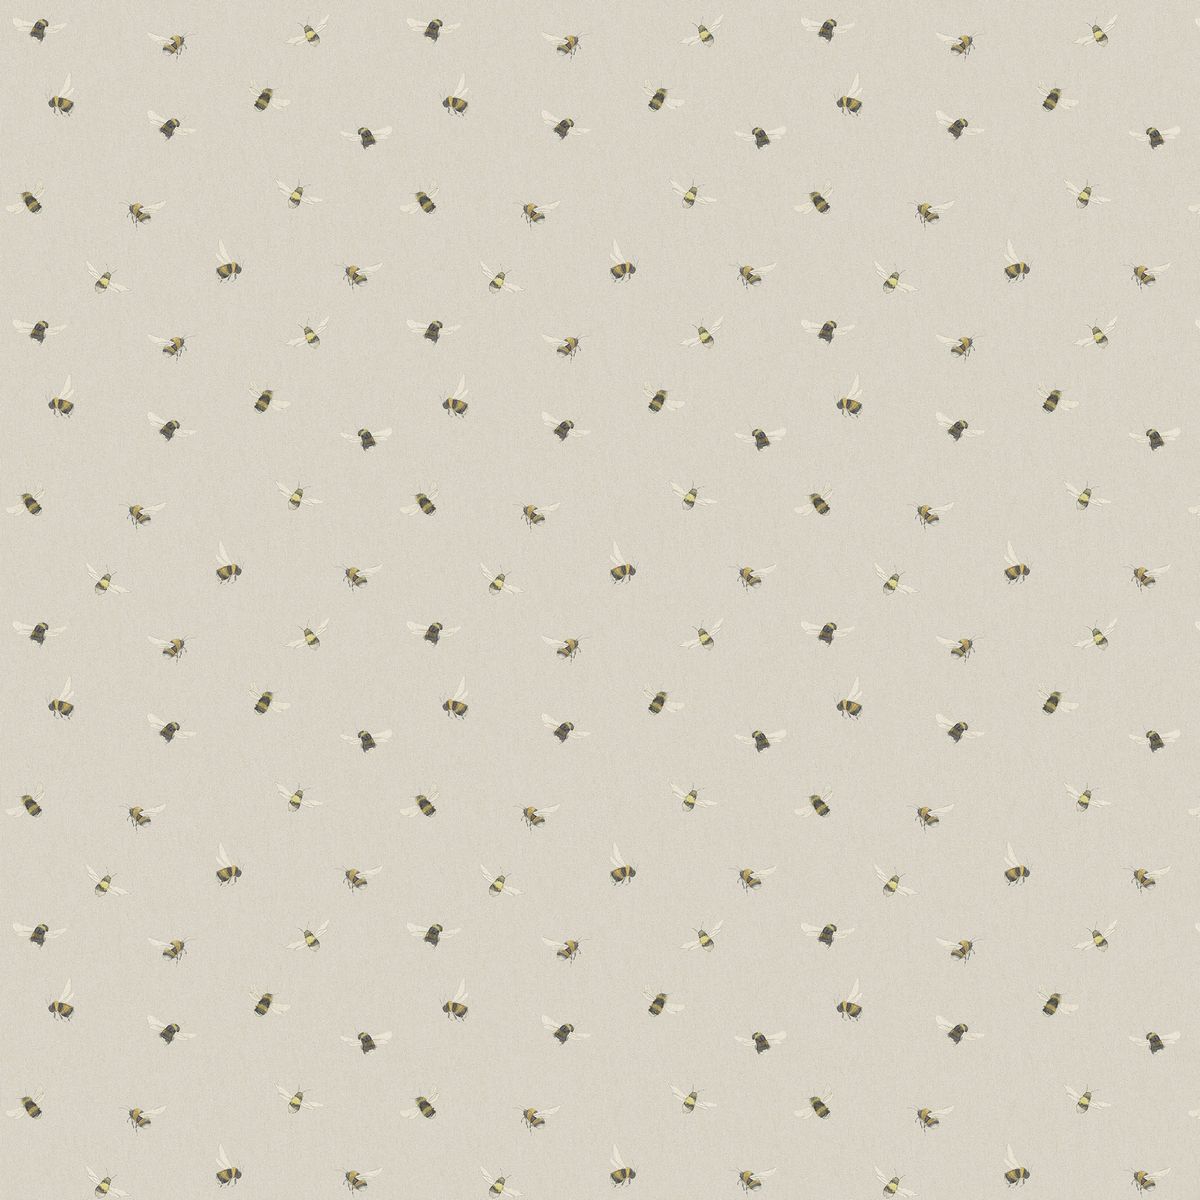 Busy Bees Linen Fabric by Voyage Maison